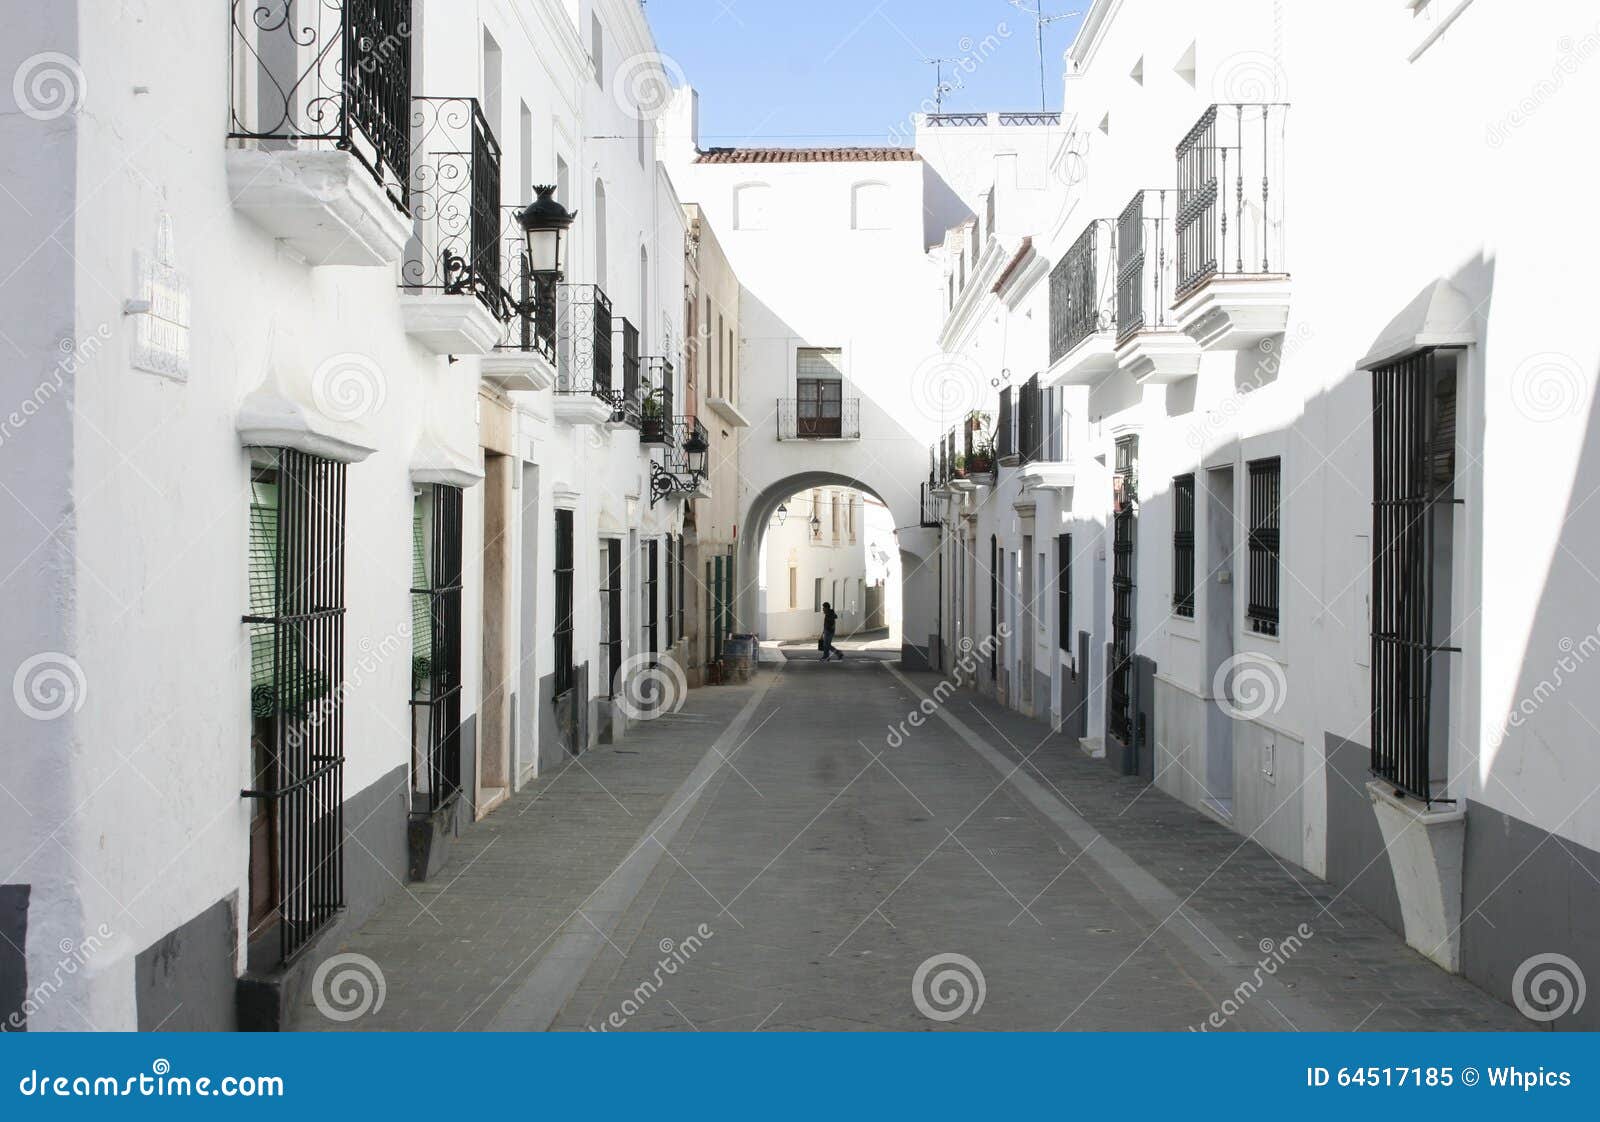 whitewashed houses at village streets of olivenza, spain